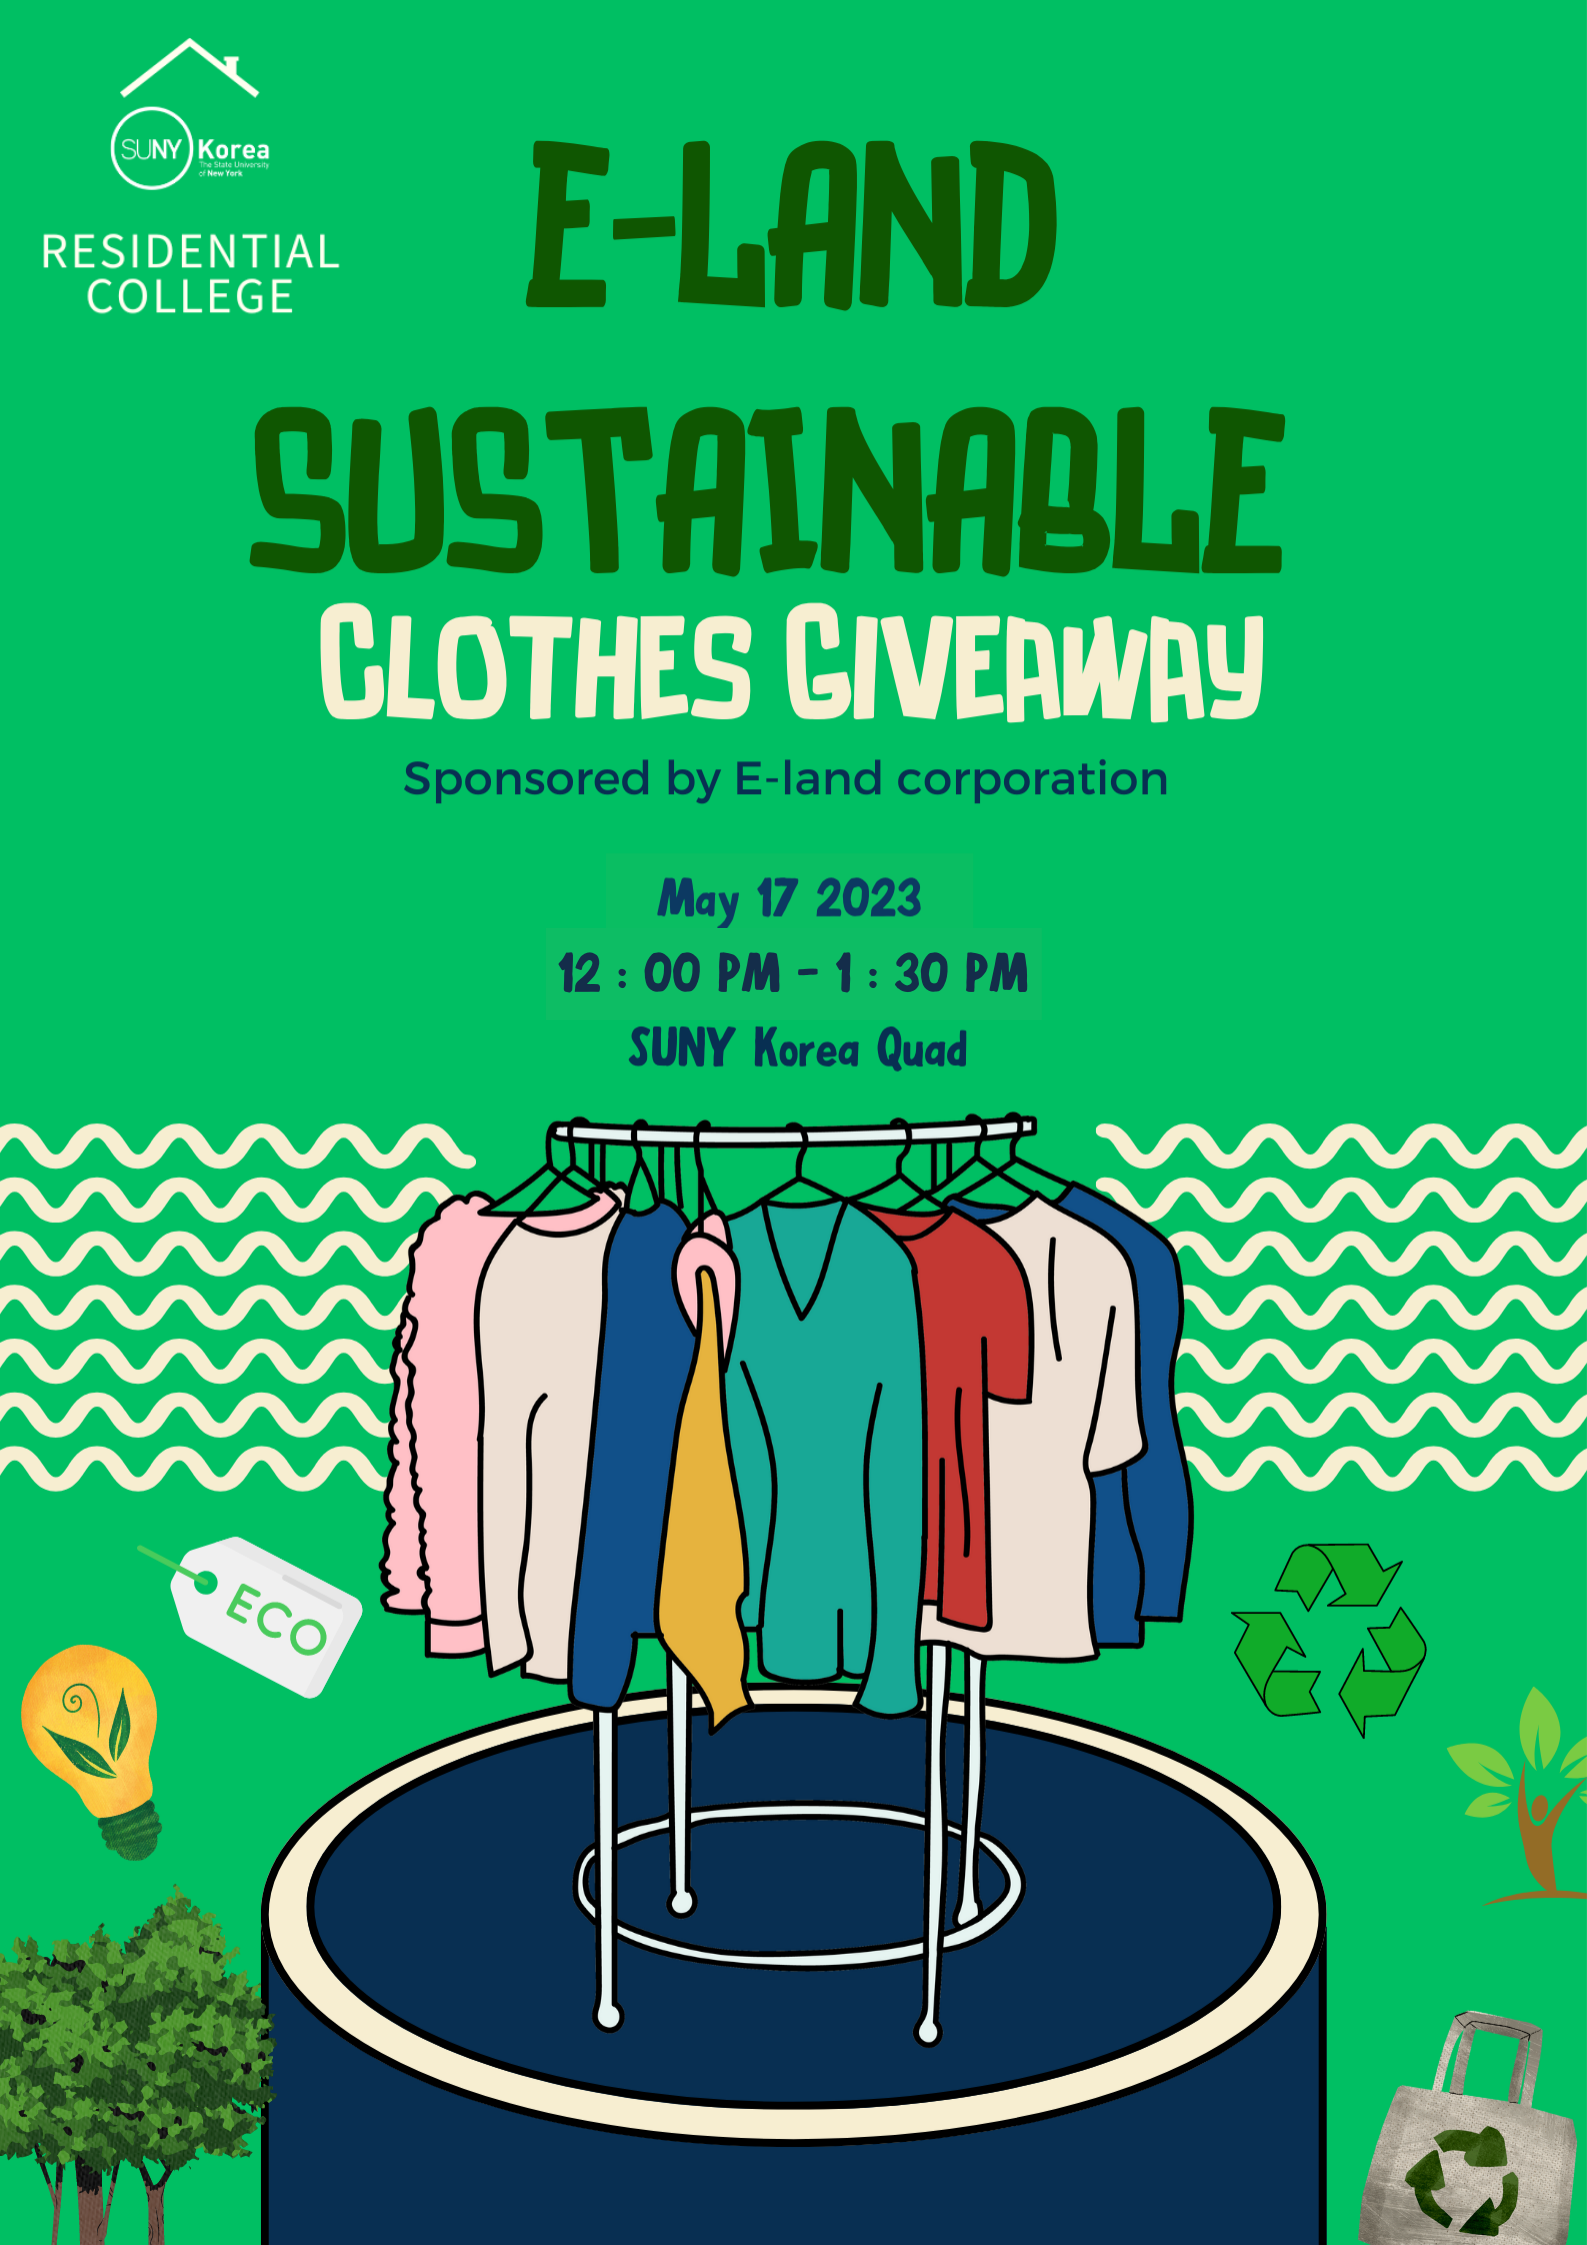 SUNY Korea RESIDENTIAL COLLEGE E-LAND SUSTAINABLE CLOTHES GIVEAWAY Sponsored by E-land corporation May 17 2023 12:00PM-1:30PM SUNY Korea Quad